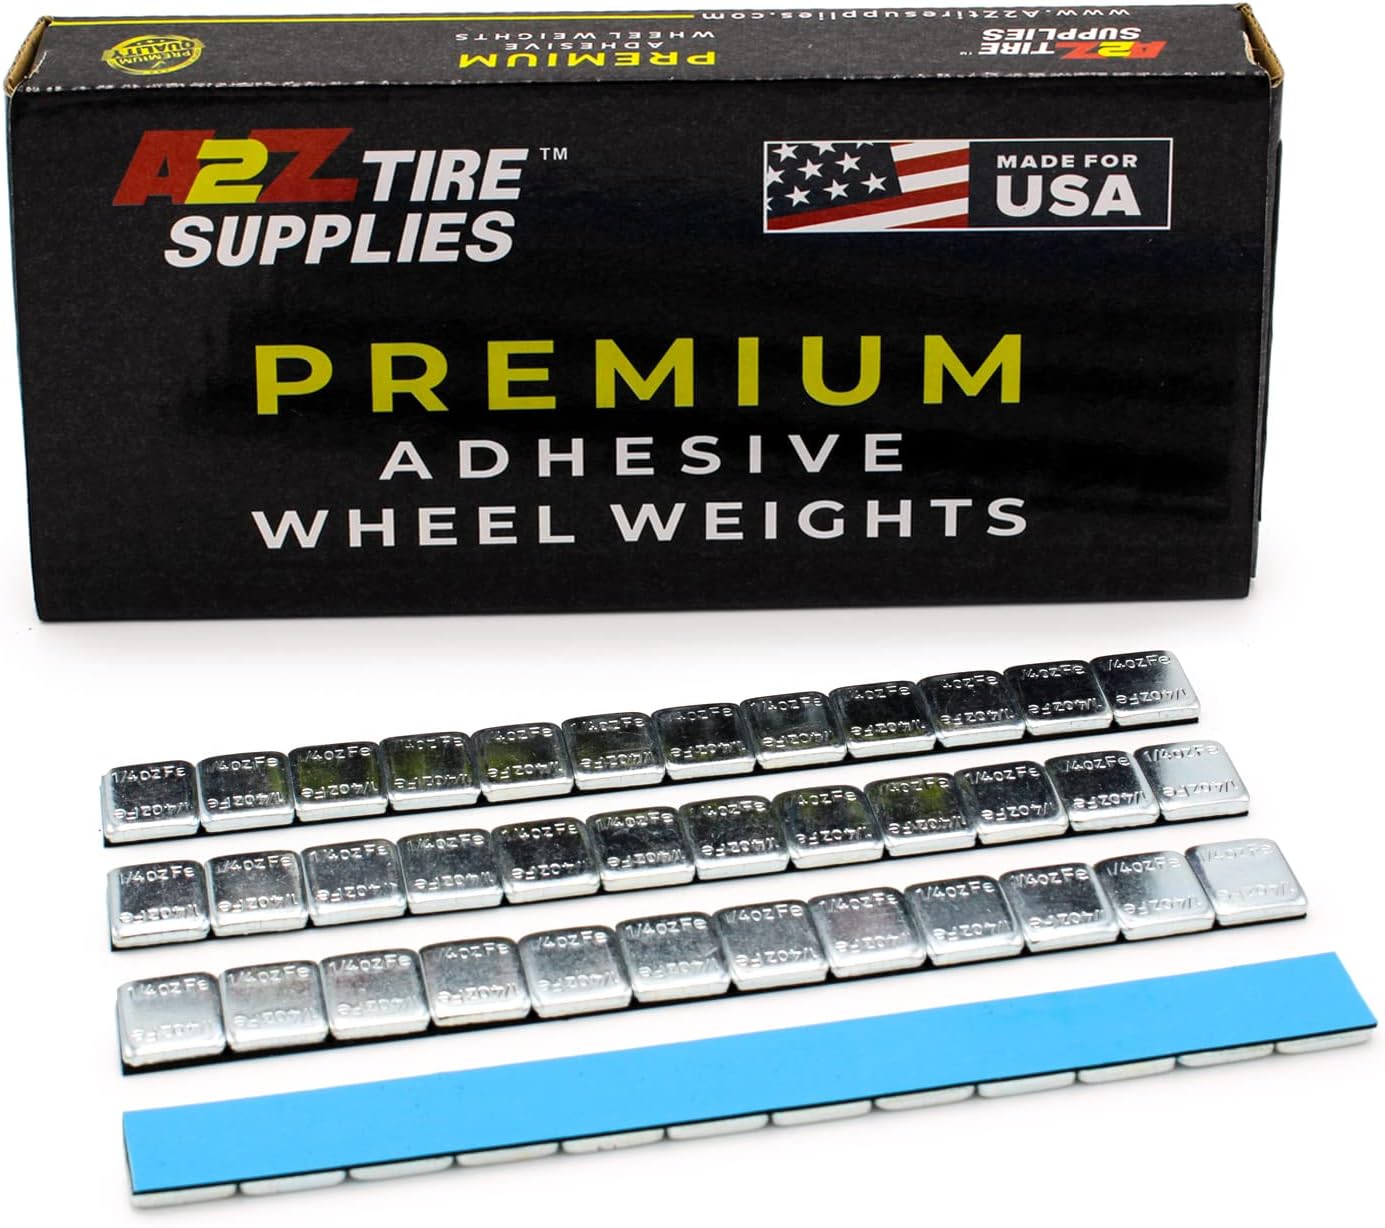 A2Z Tire Supplies 360 pcs Zinc Plated FE Low Profile Adhesive Wheel Weight 1/4oz Segments 30 Strips 6 Lbs for Car, SUV, Truck Specially Made for US Market